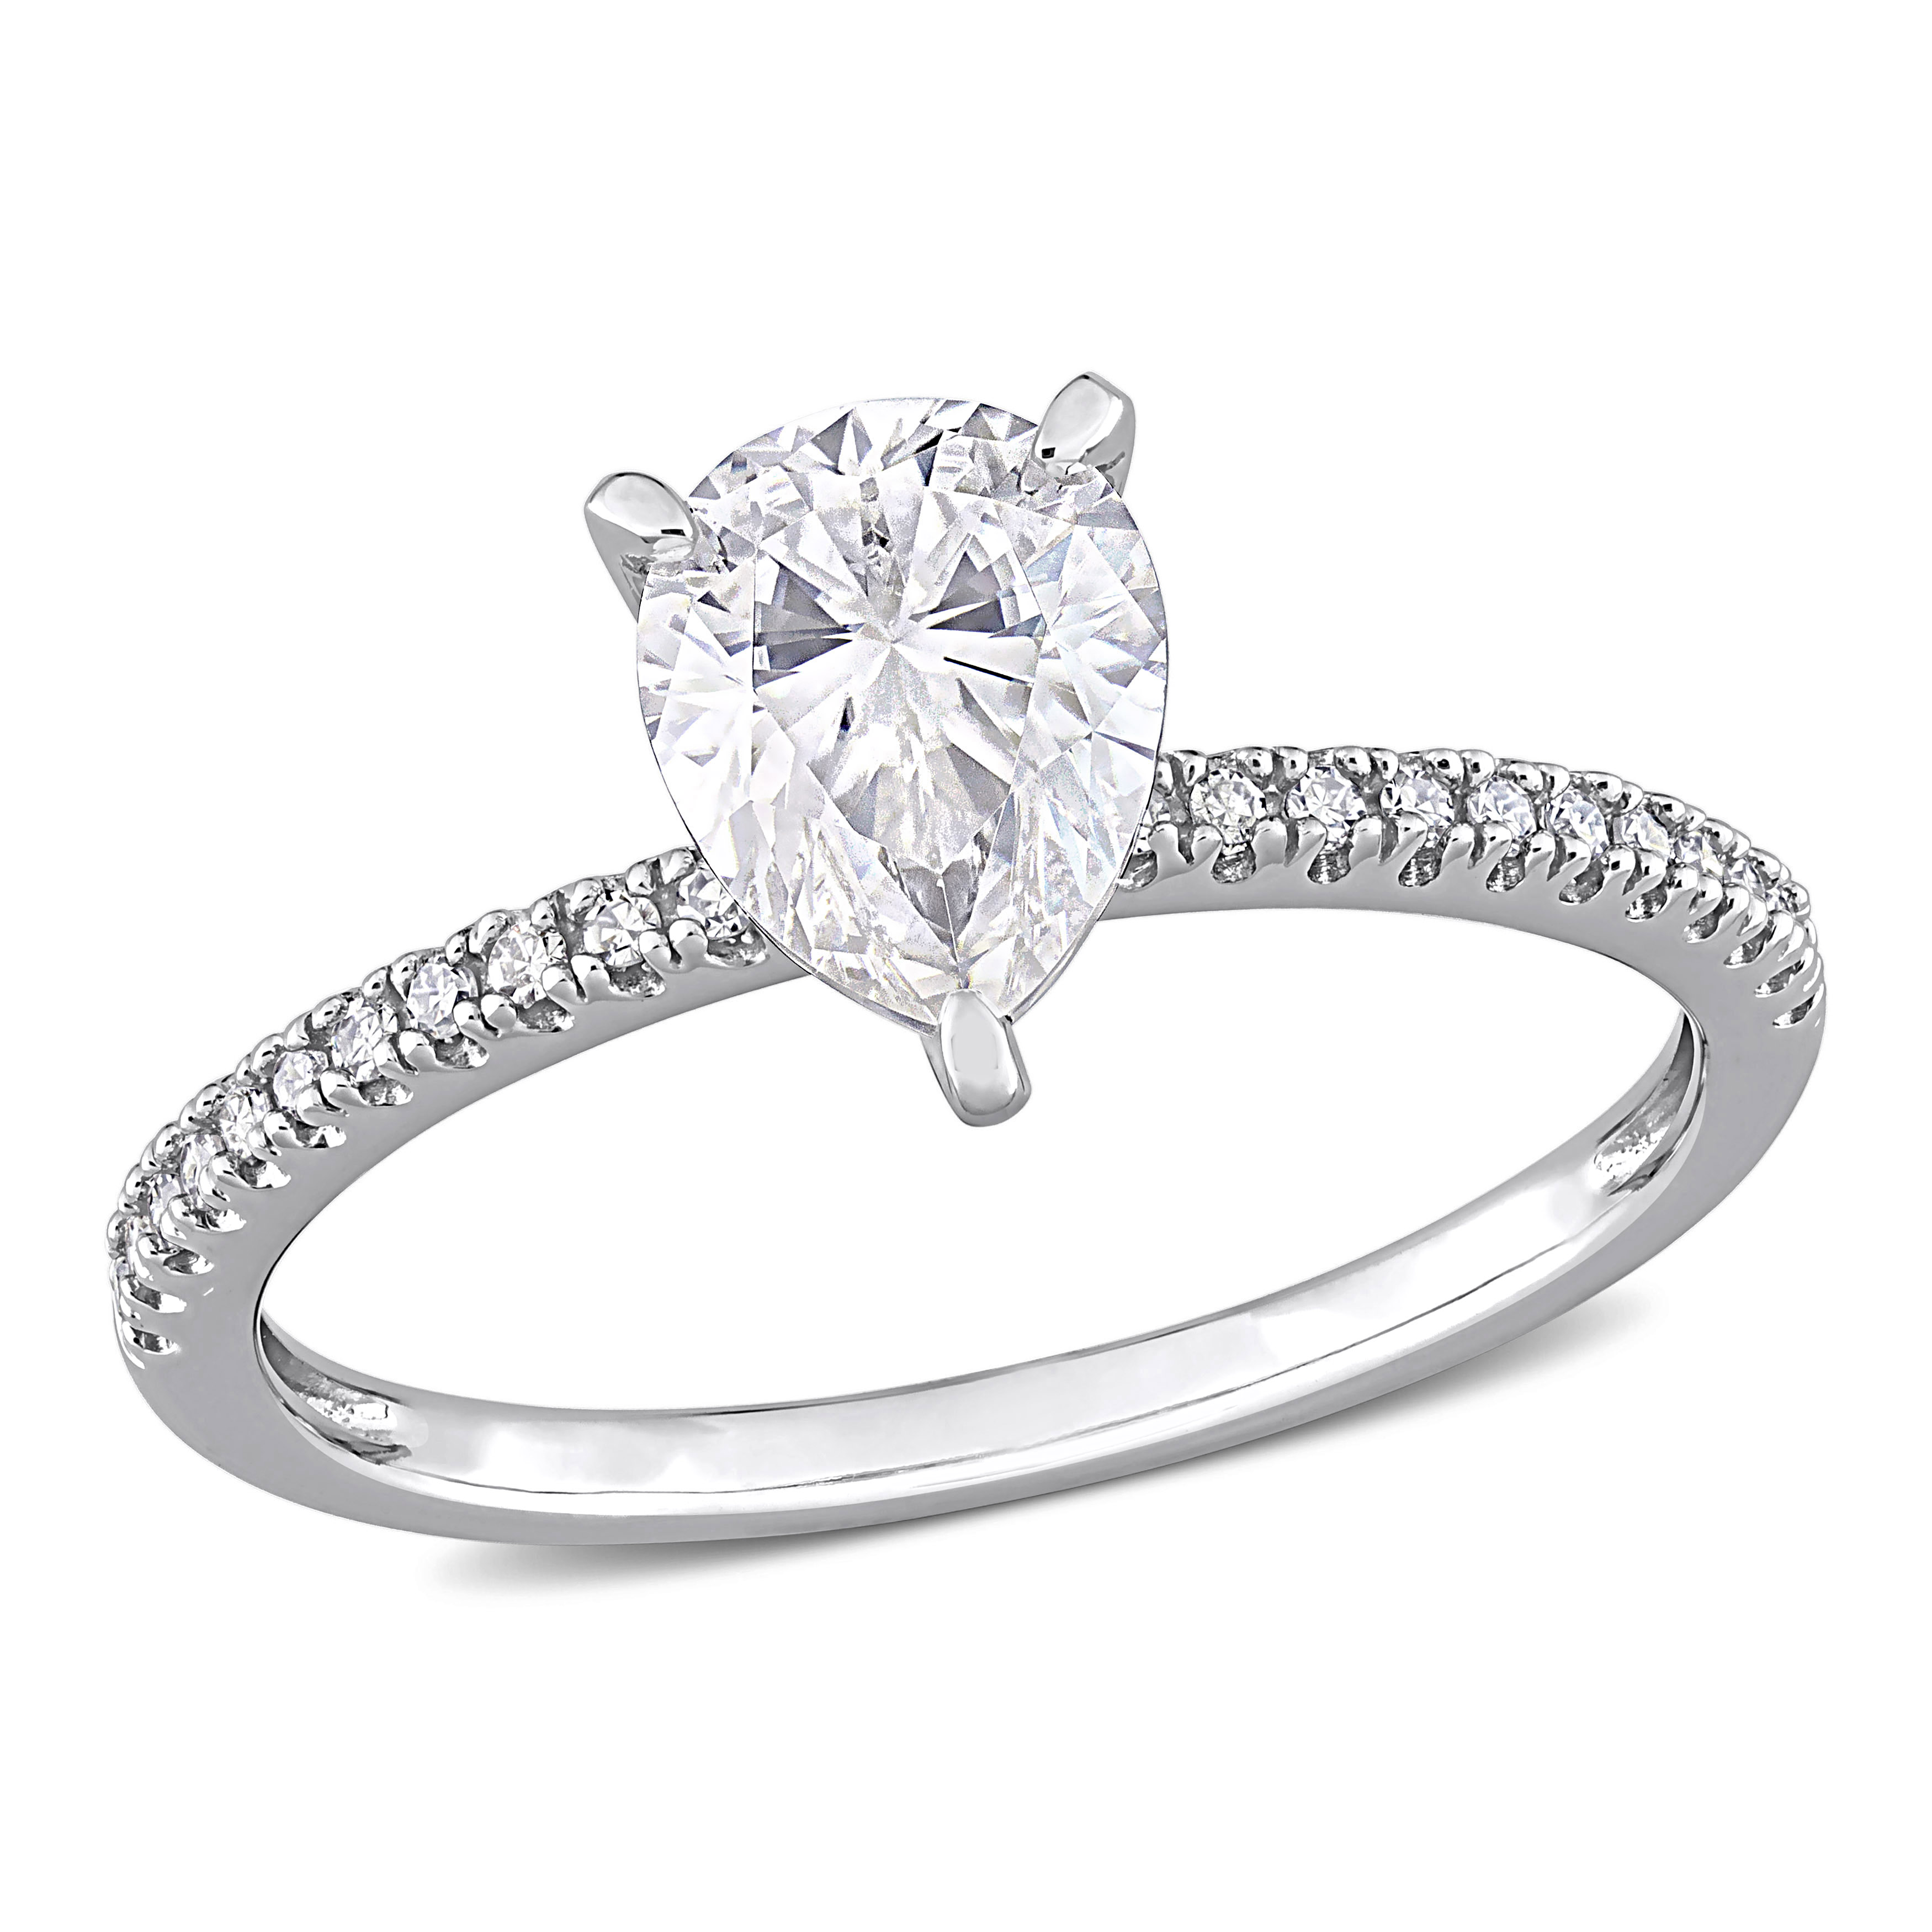 1 1/4 CT DEW Pear Shape Created Moissanite and 1/10 CT TW Diamond Engagement Ring in 14k White Gold